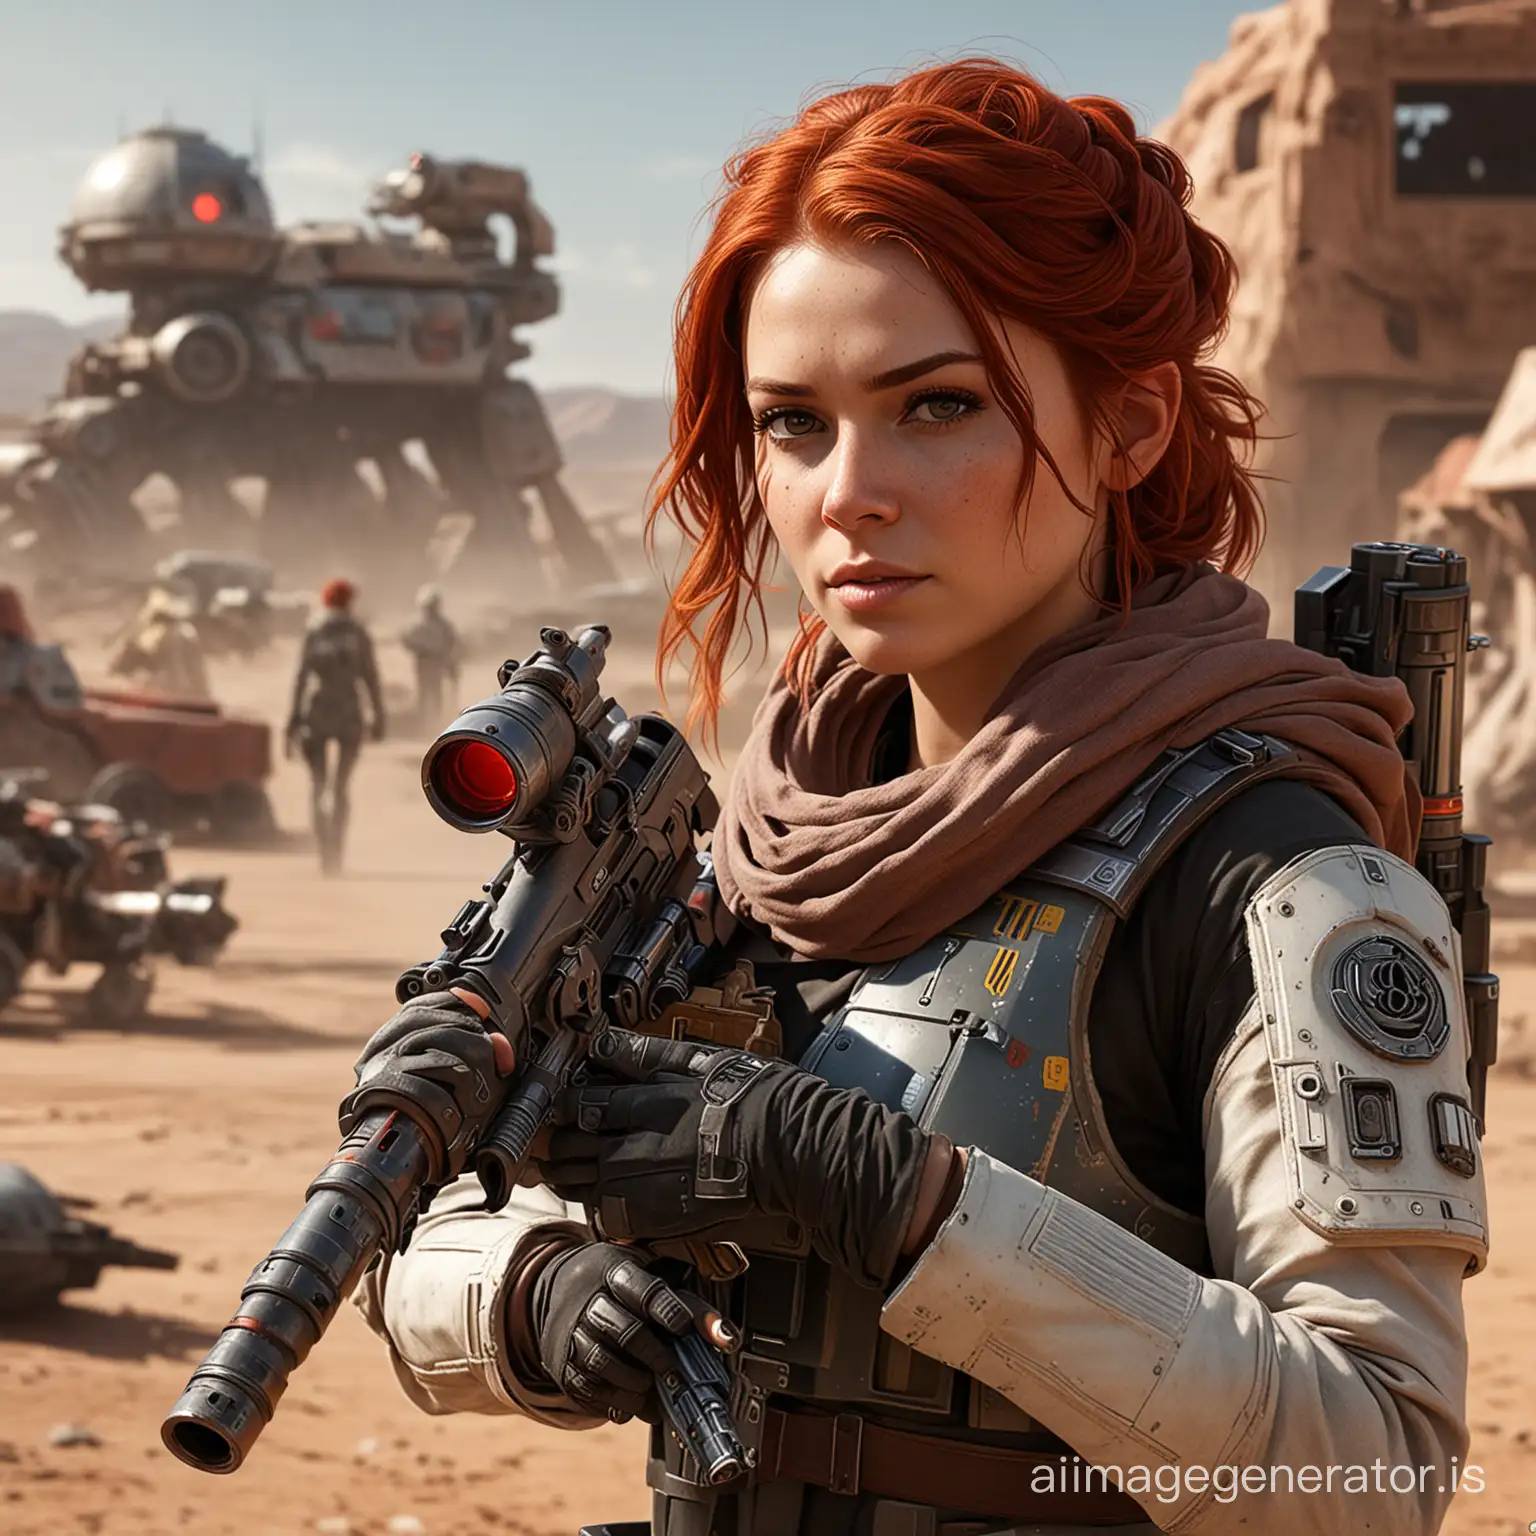 masterpiece, detailed, realistic, digital art, Mira from Star wars, red hair, holding a laser rifle, detailed, bokeh, realistic, fallout style, walking, atomic wasteland, bokeh,